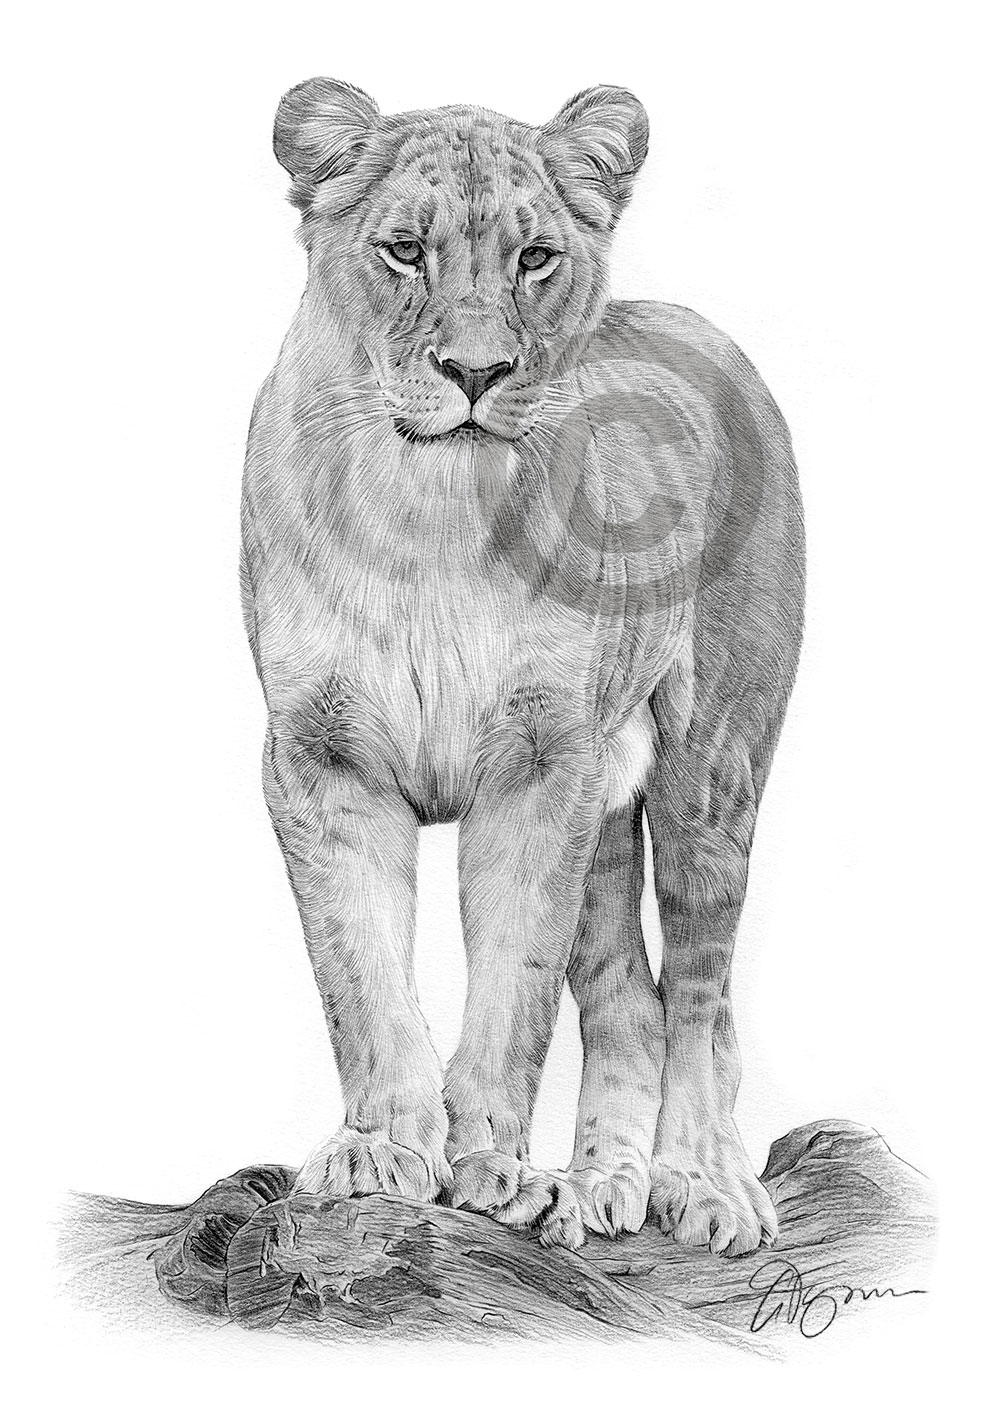 Pencil drawing of a young lioness by artist Gary Tymon